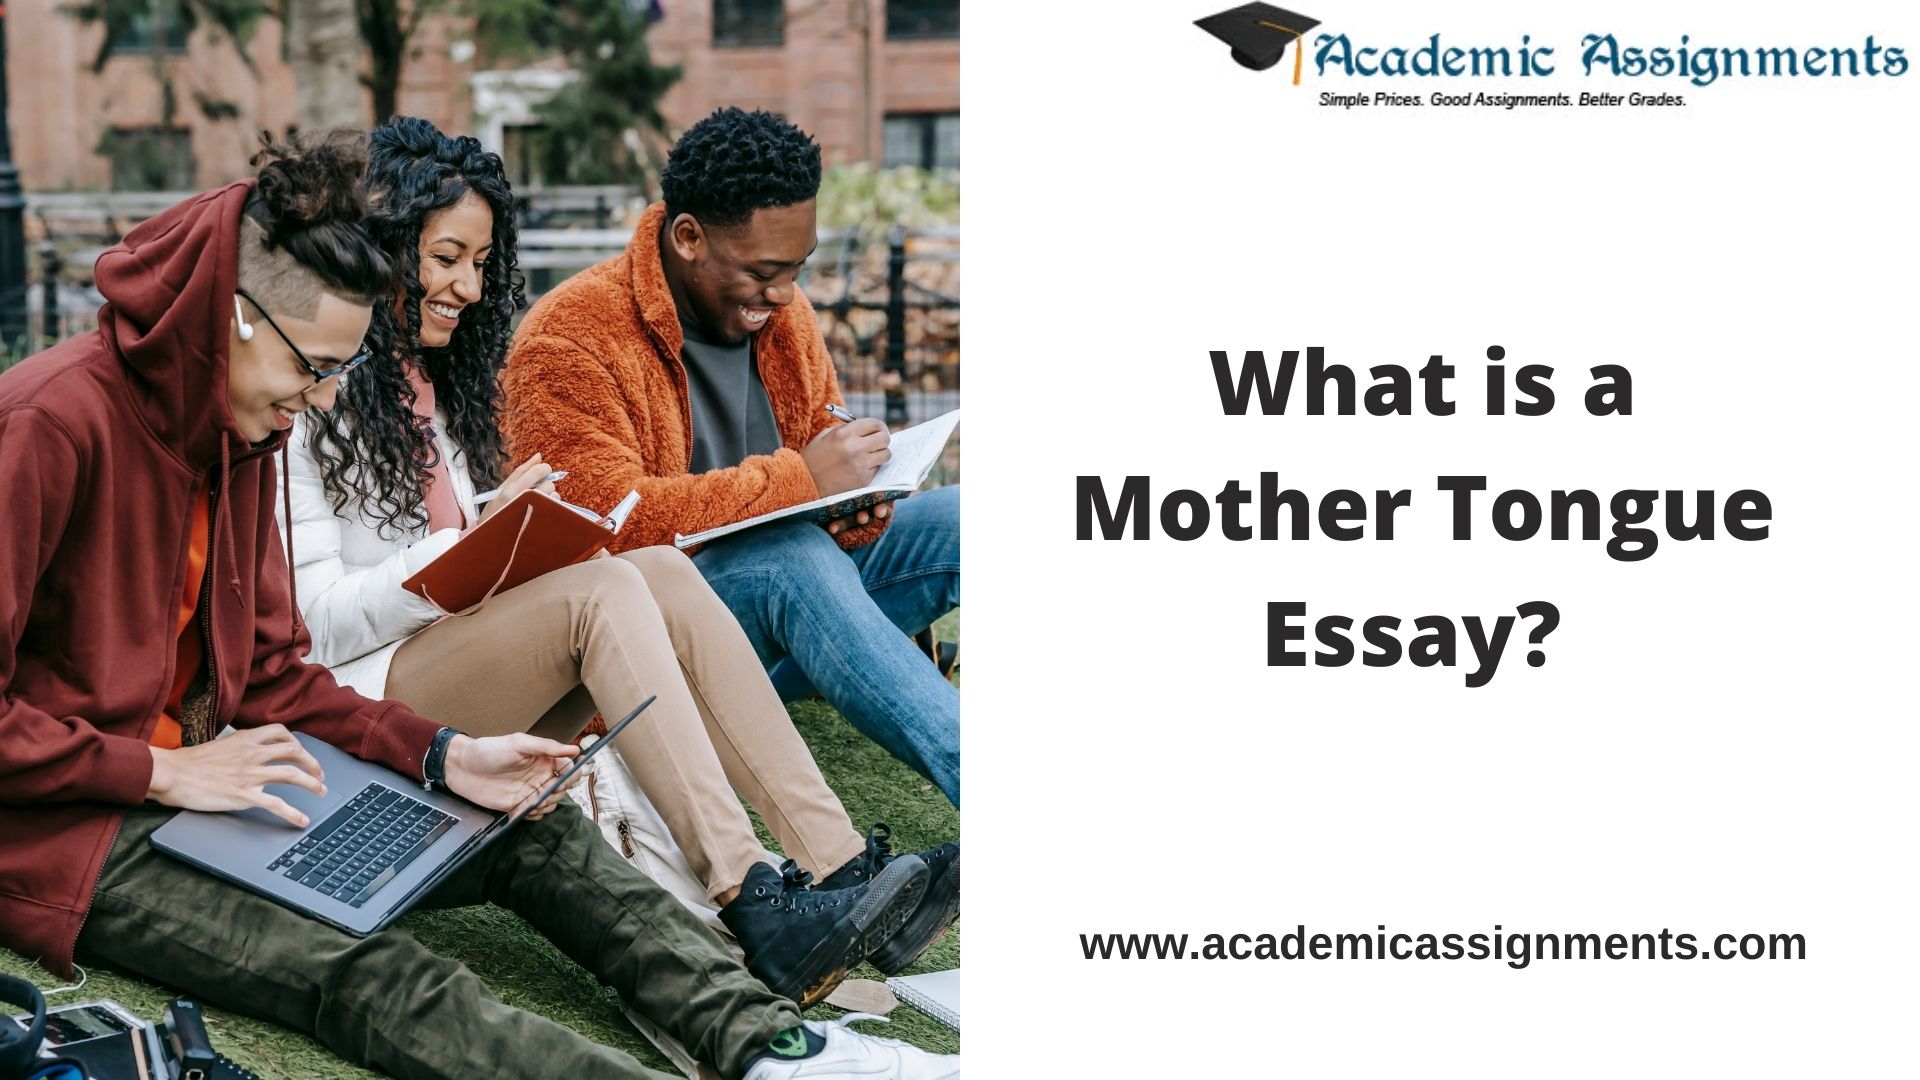 What is a Mother Tongue Essay